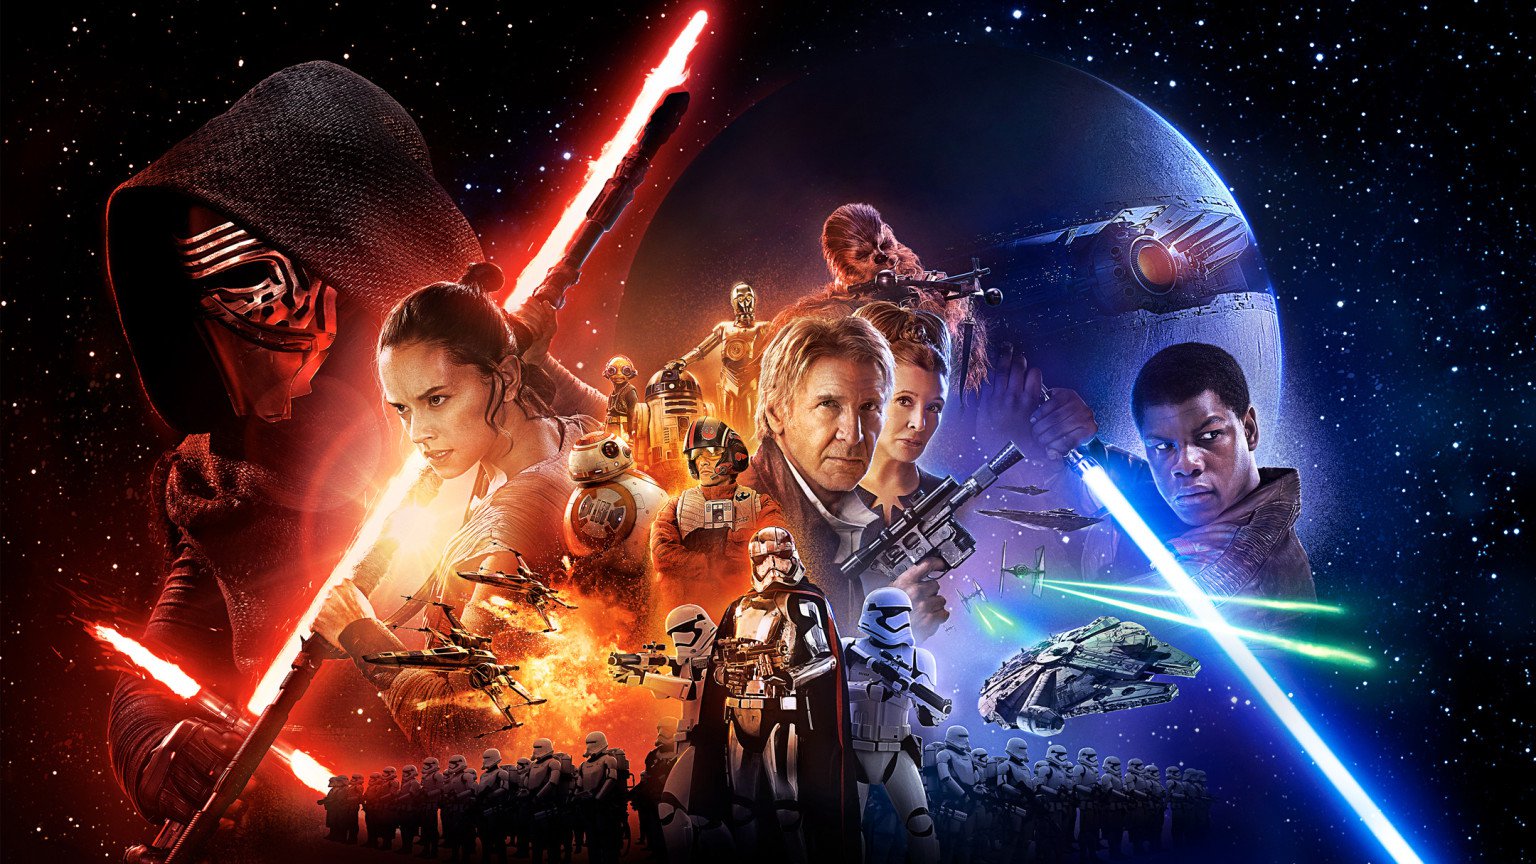 Star Wars The Force Awakens set for a 600 million opening weekend